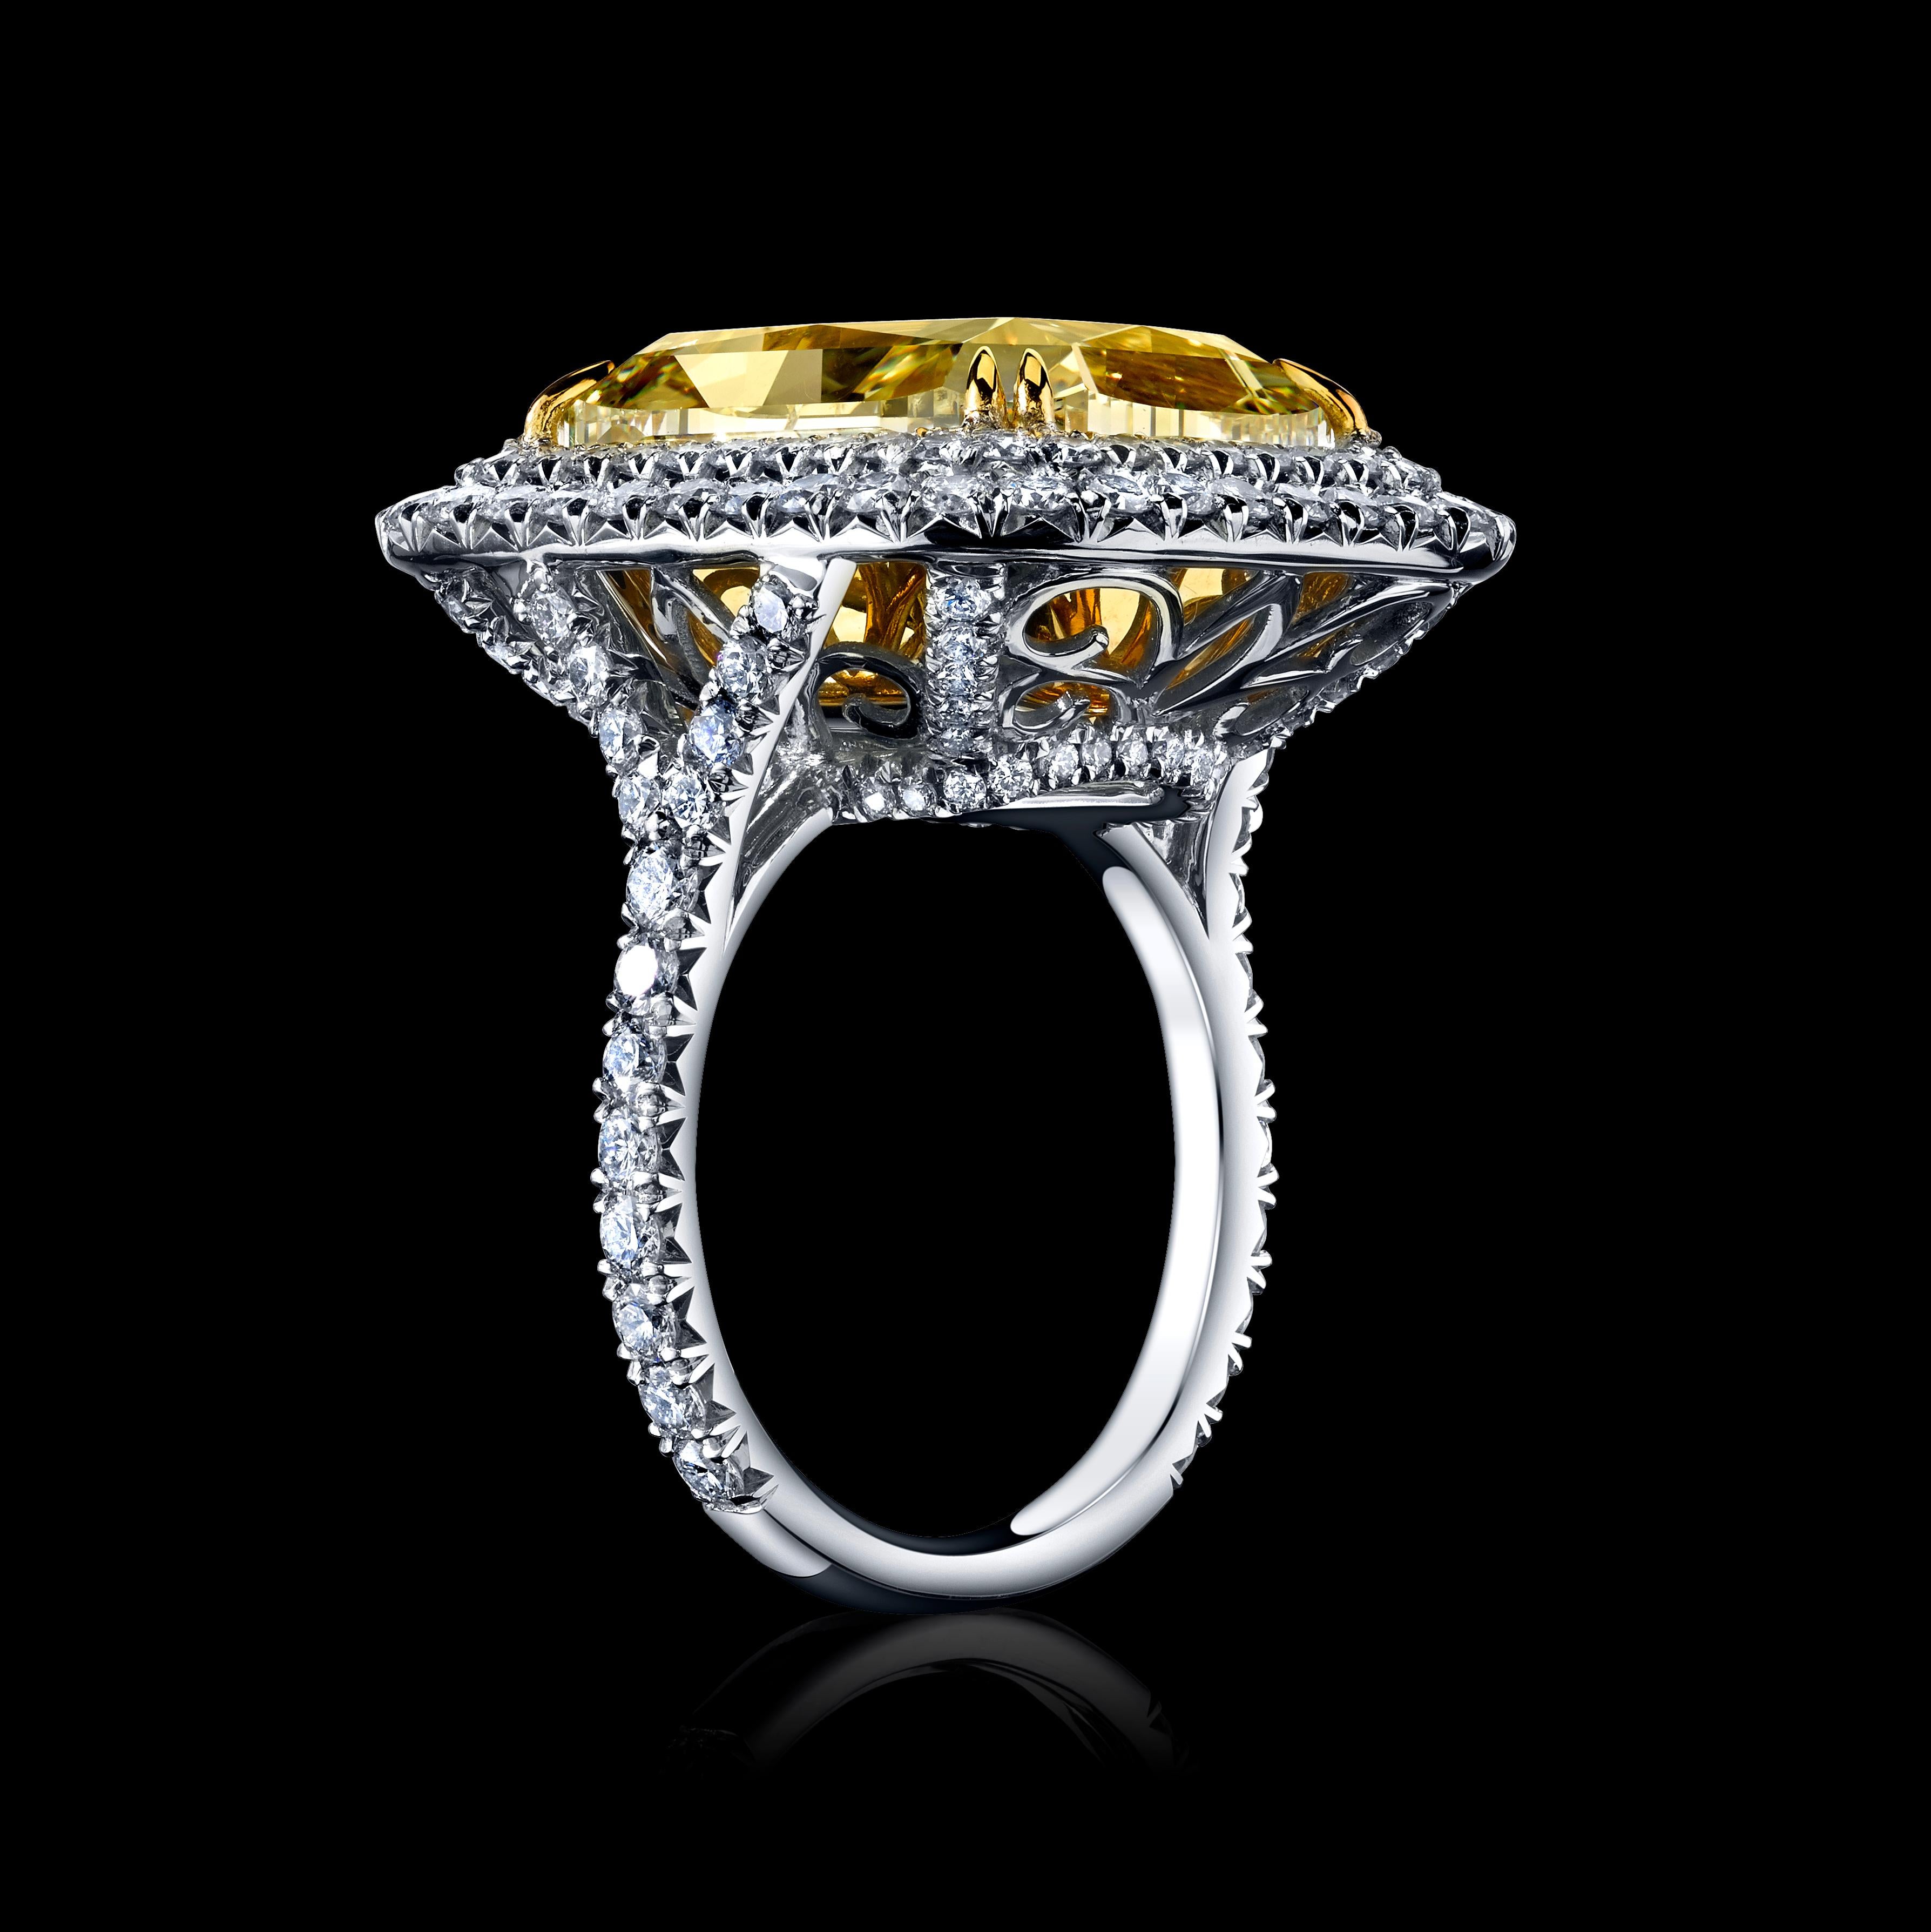 This classically designed ring will take your breath away.

A stunning 17.49ct Cushion Fancy Light Yellow Natural Diamond with 2 Tapered Baguettes totaling 0.96cts set in Platinum & 18K Yellow Gold.

This diamond has two different settings - choose